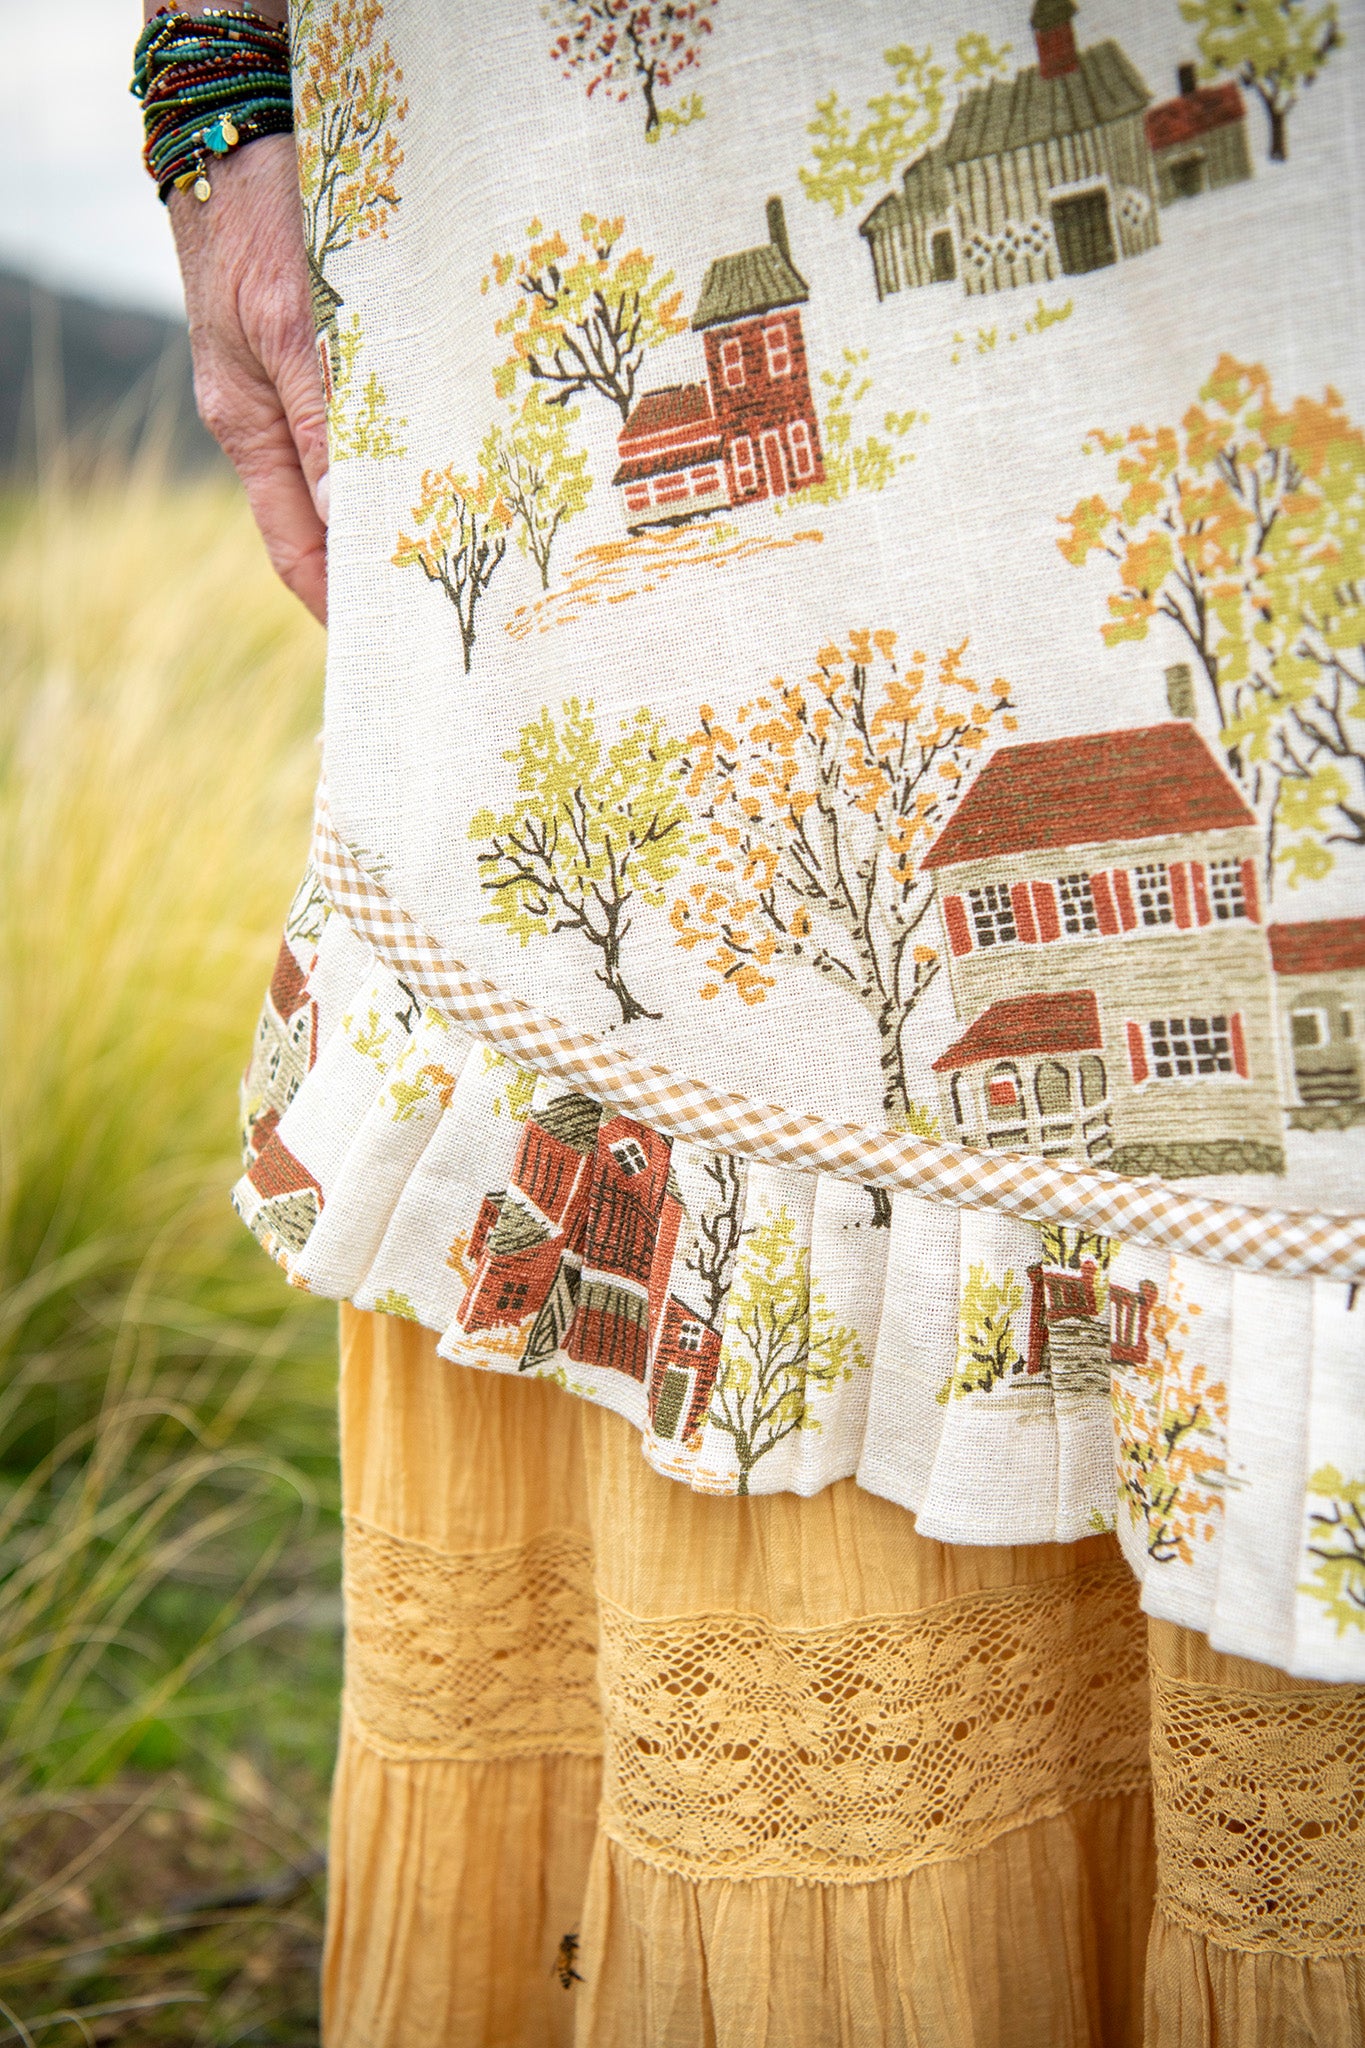 Limited-Edition, '50 Years on the Prairie' Pinafore Apron